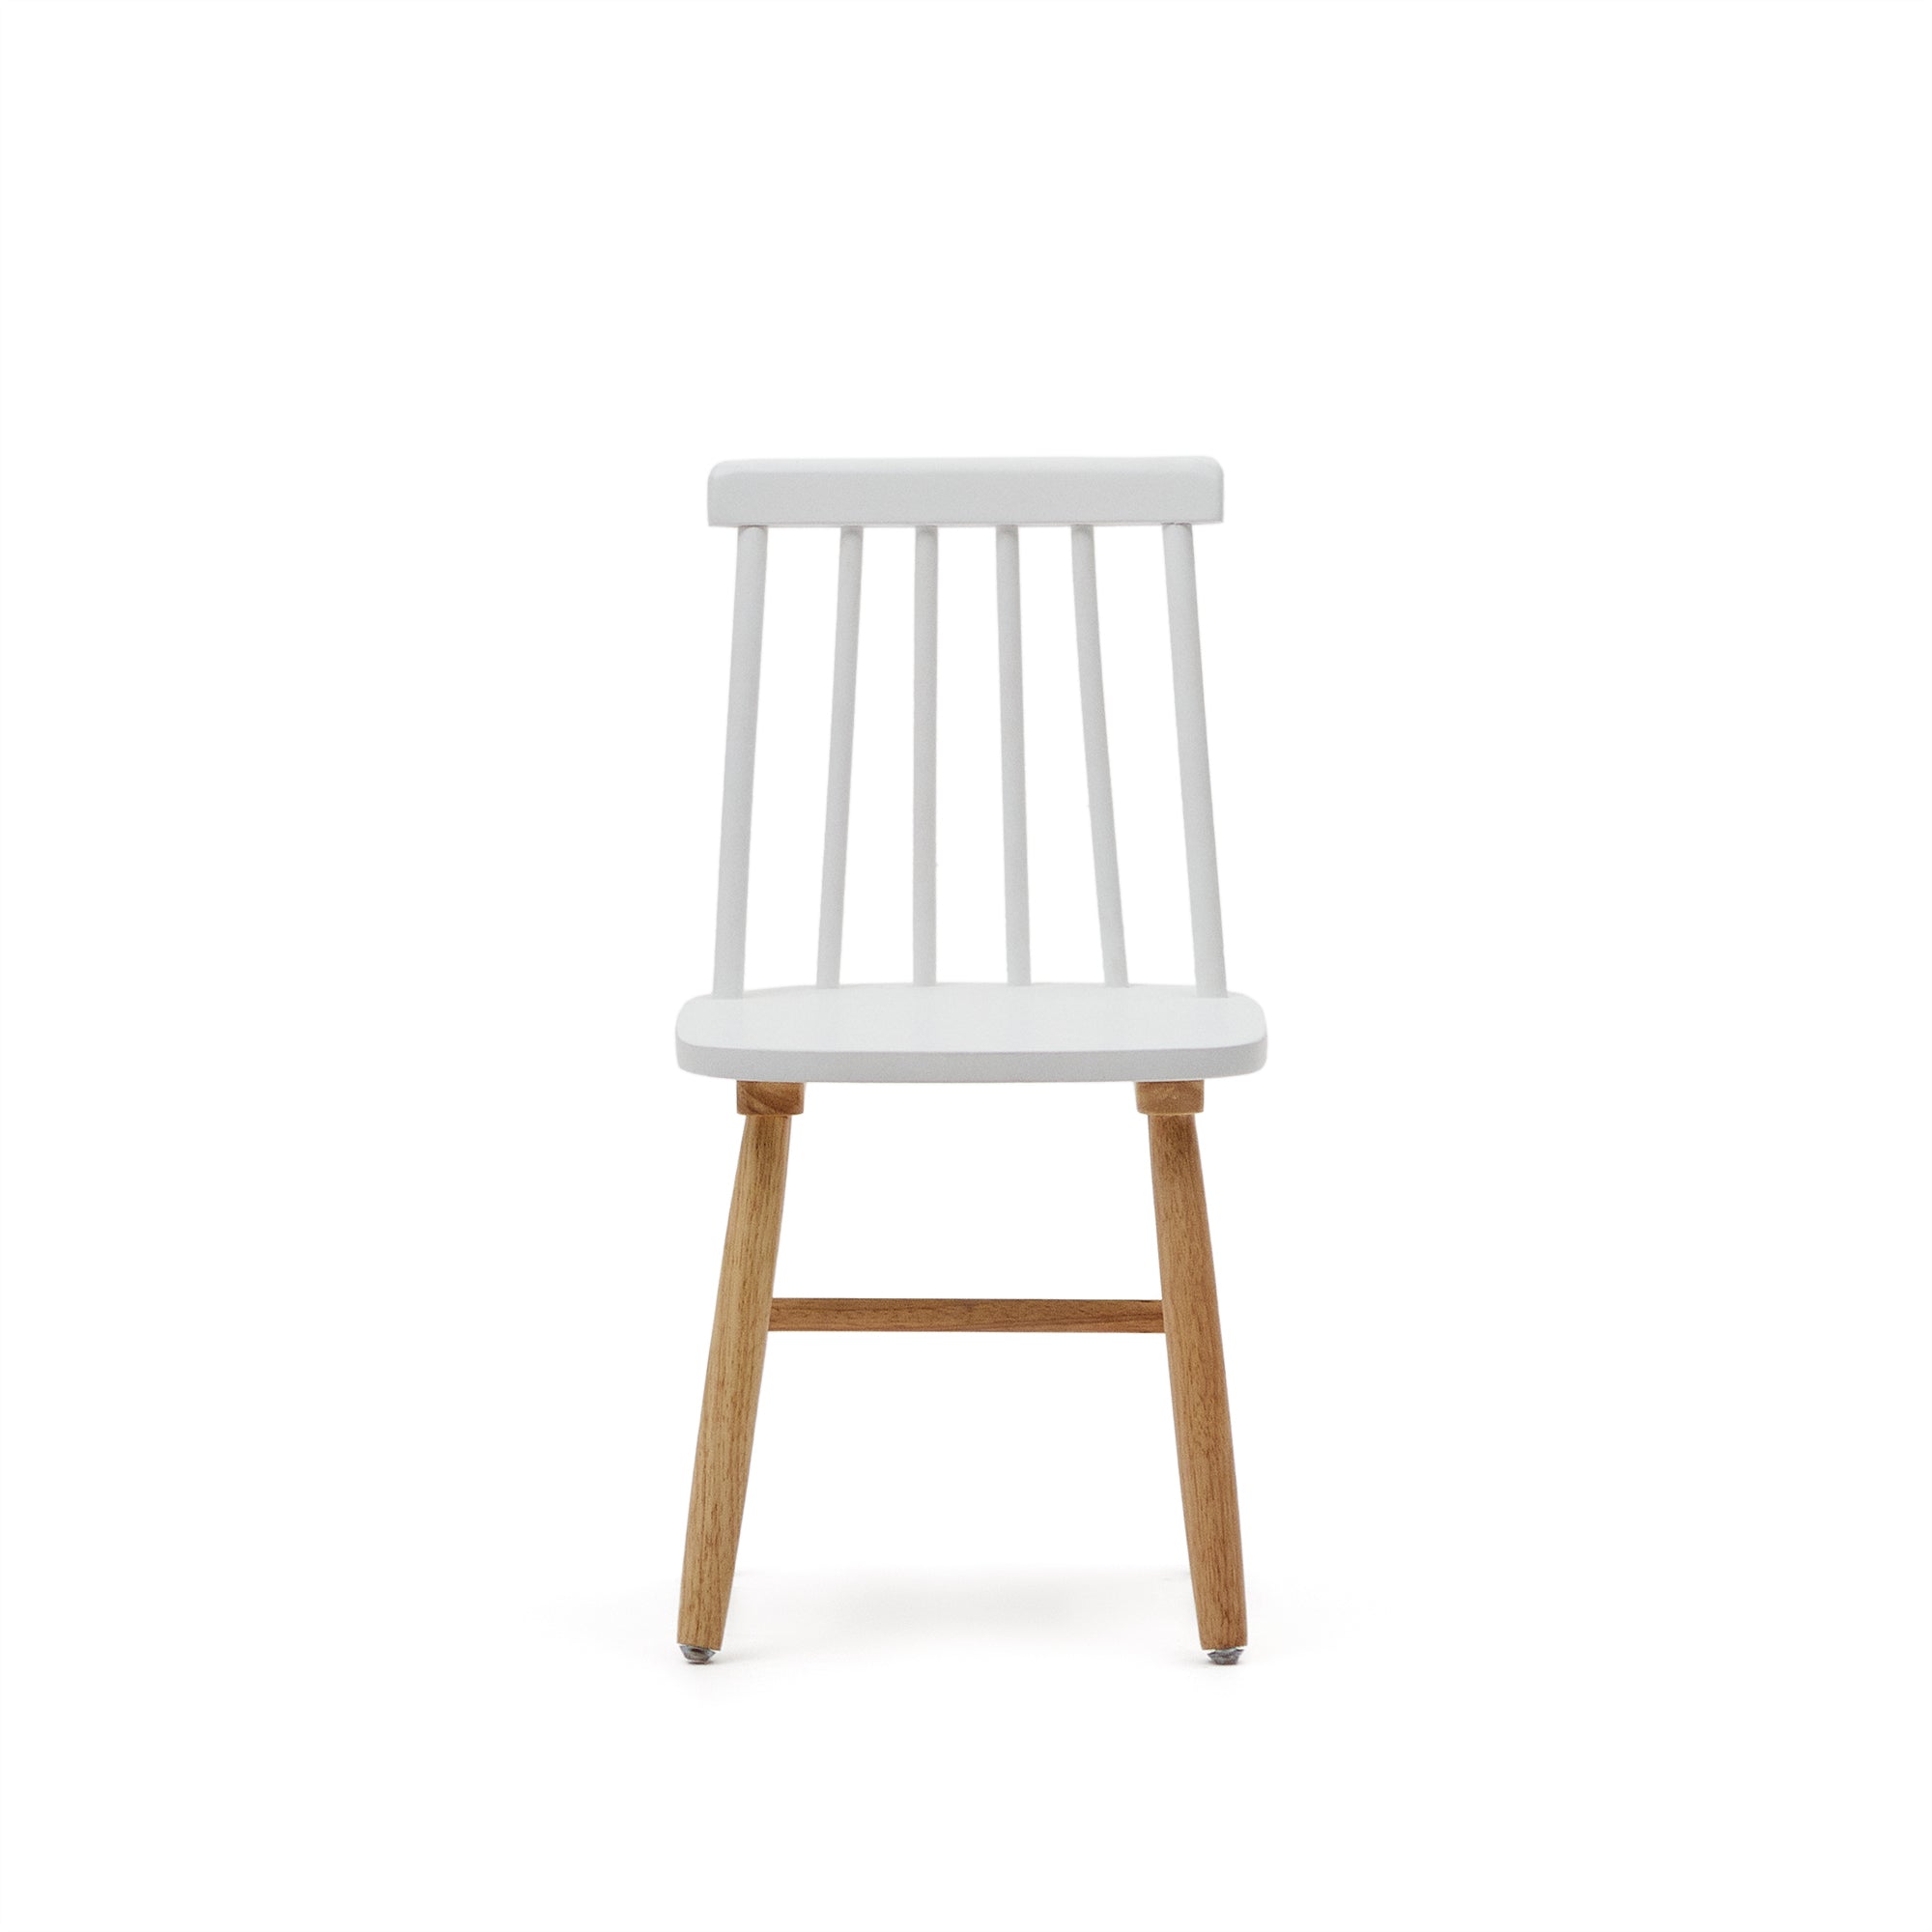 Tressia kids chair in solid rubber wood with white and natural finish